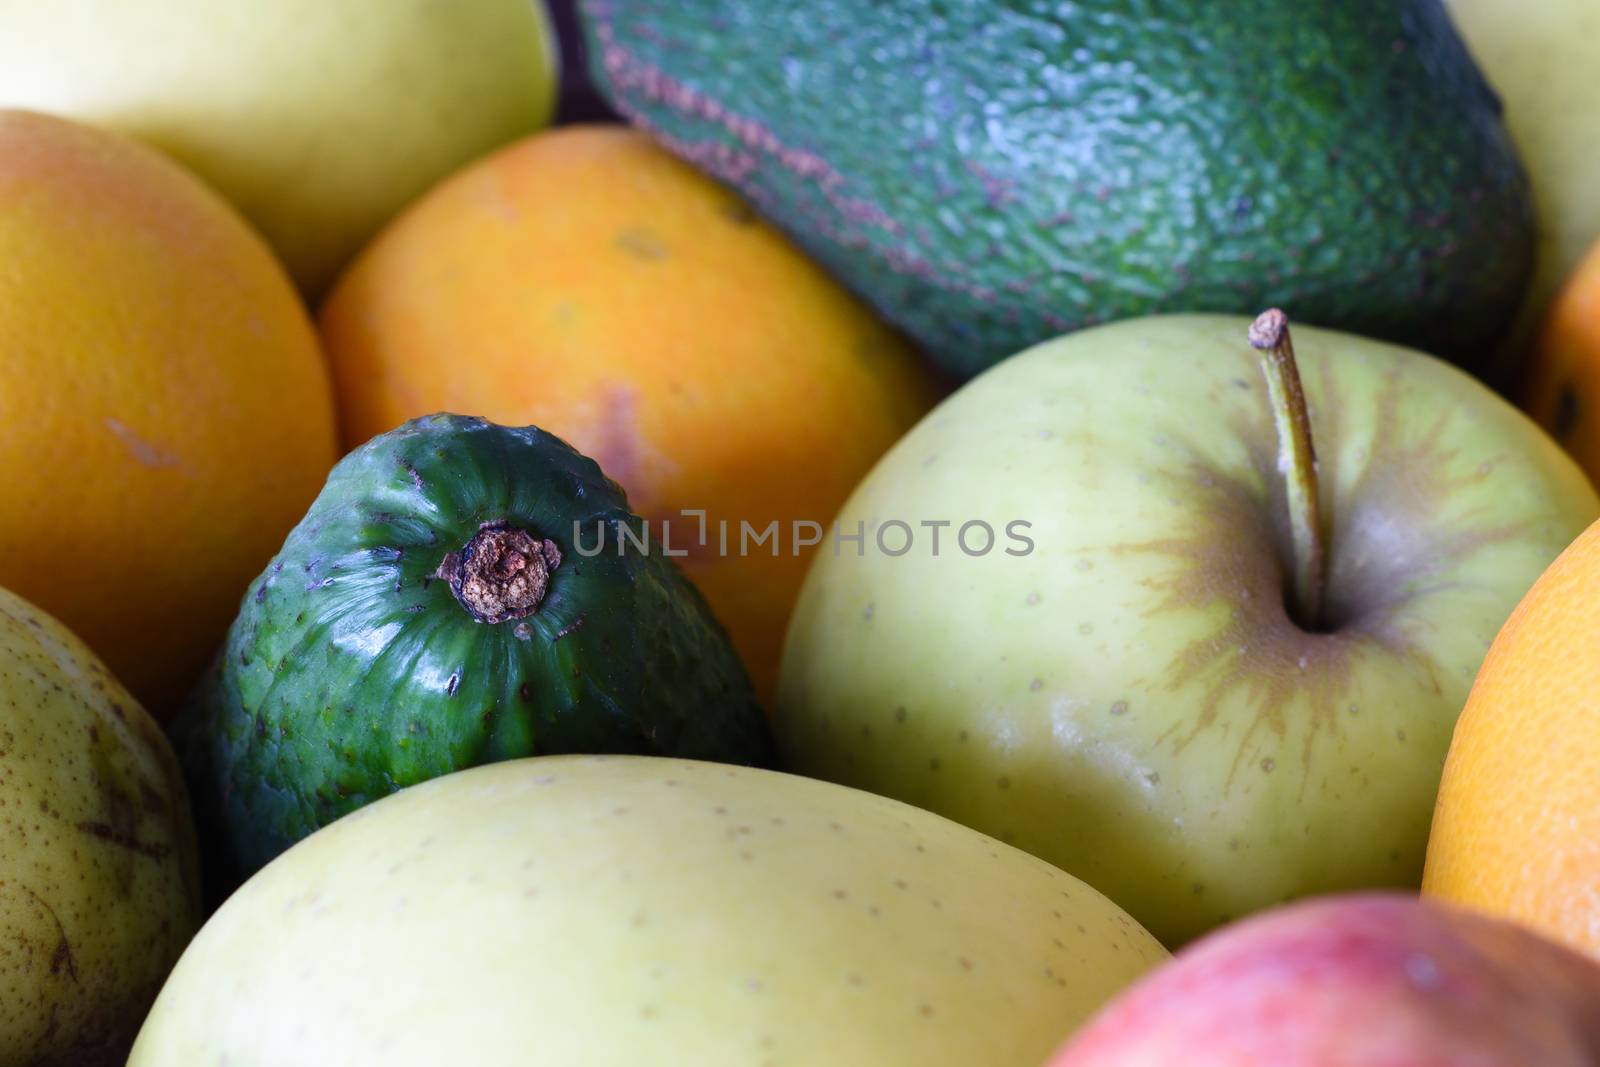 A close-up frame of a variety of mixed fresh fruits including avocados